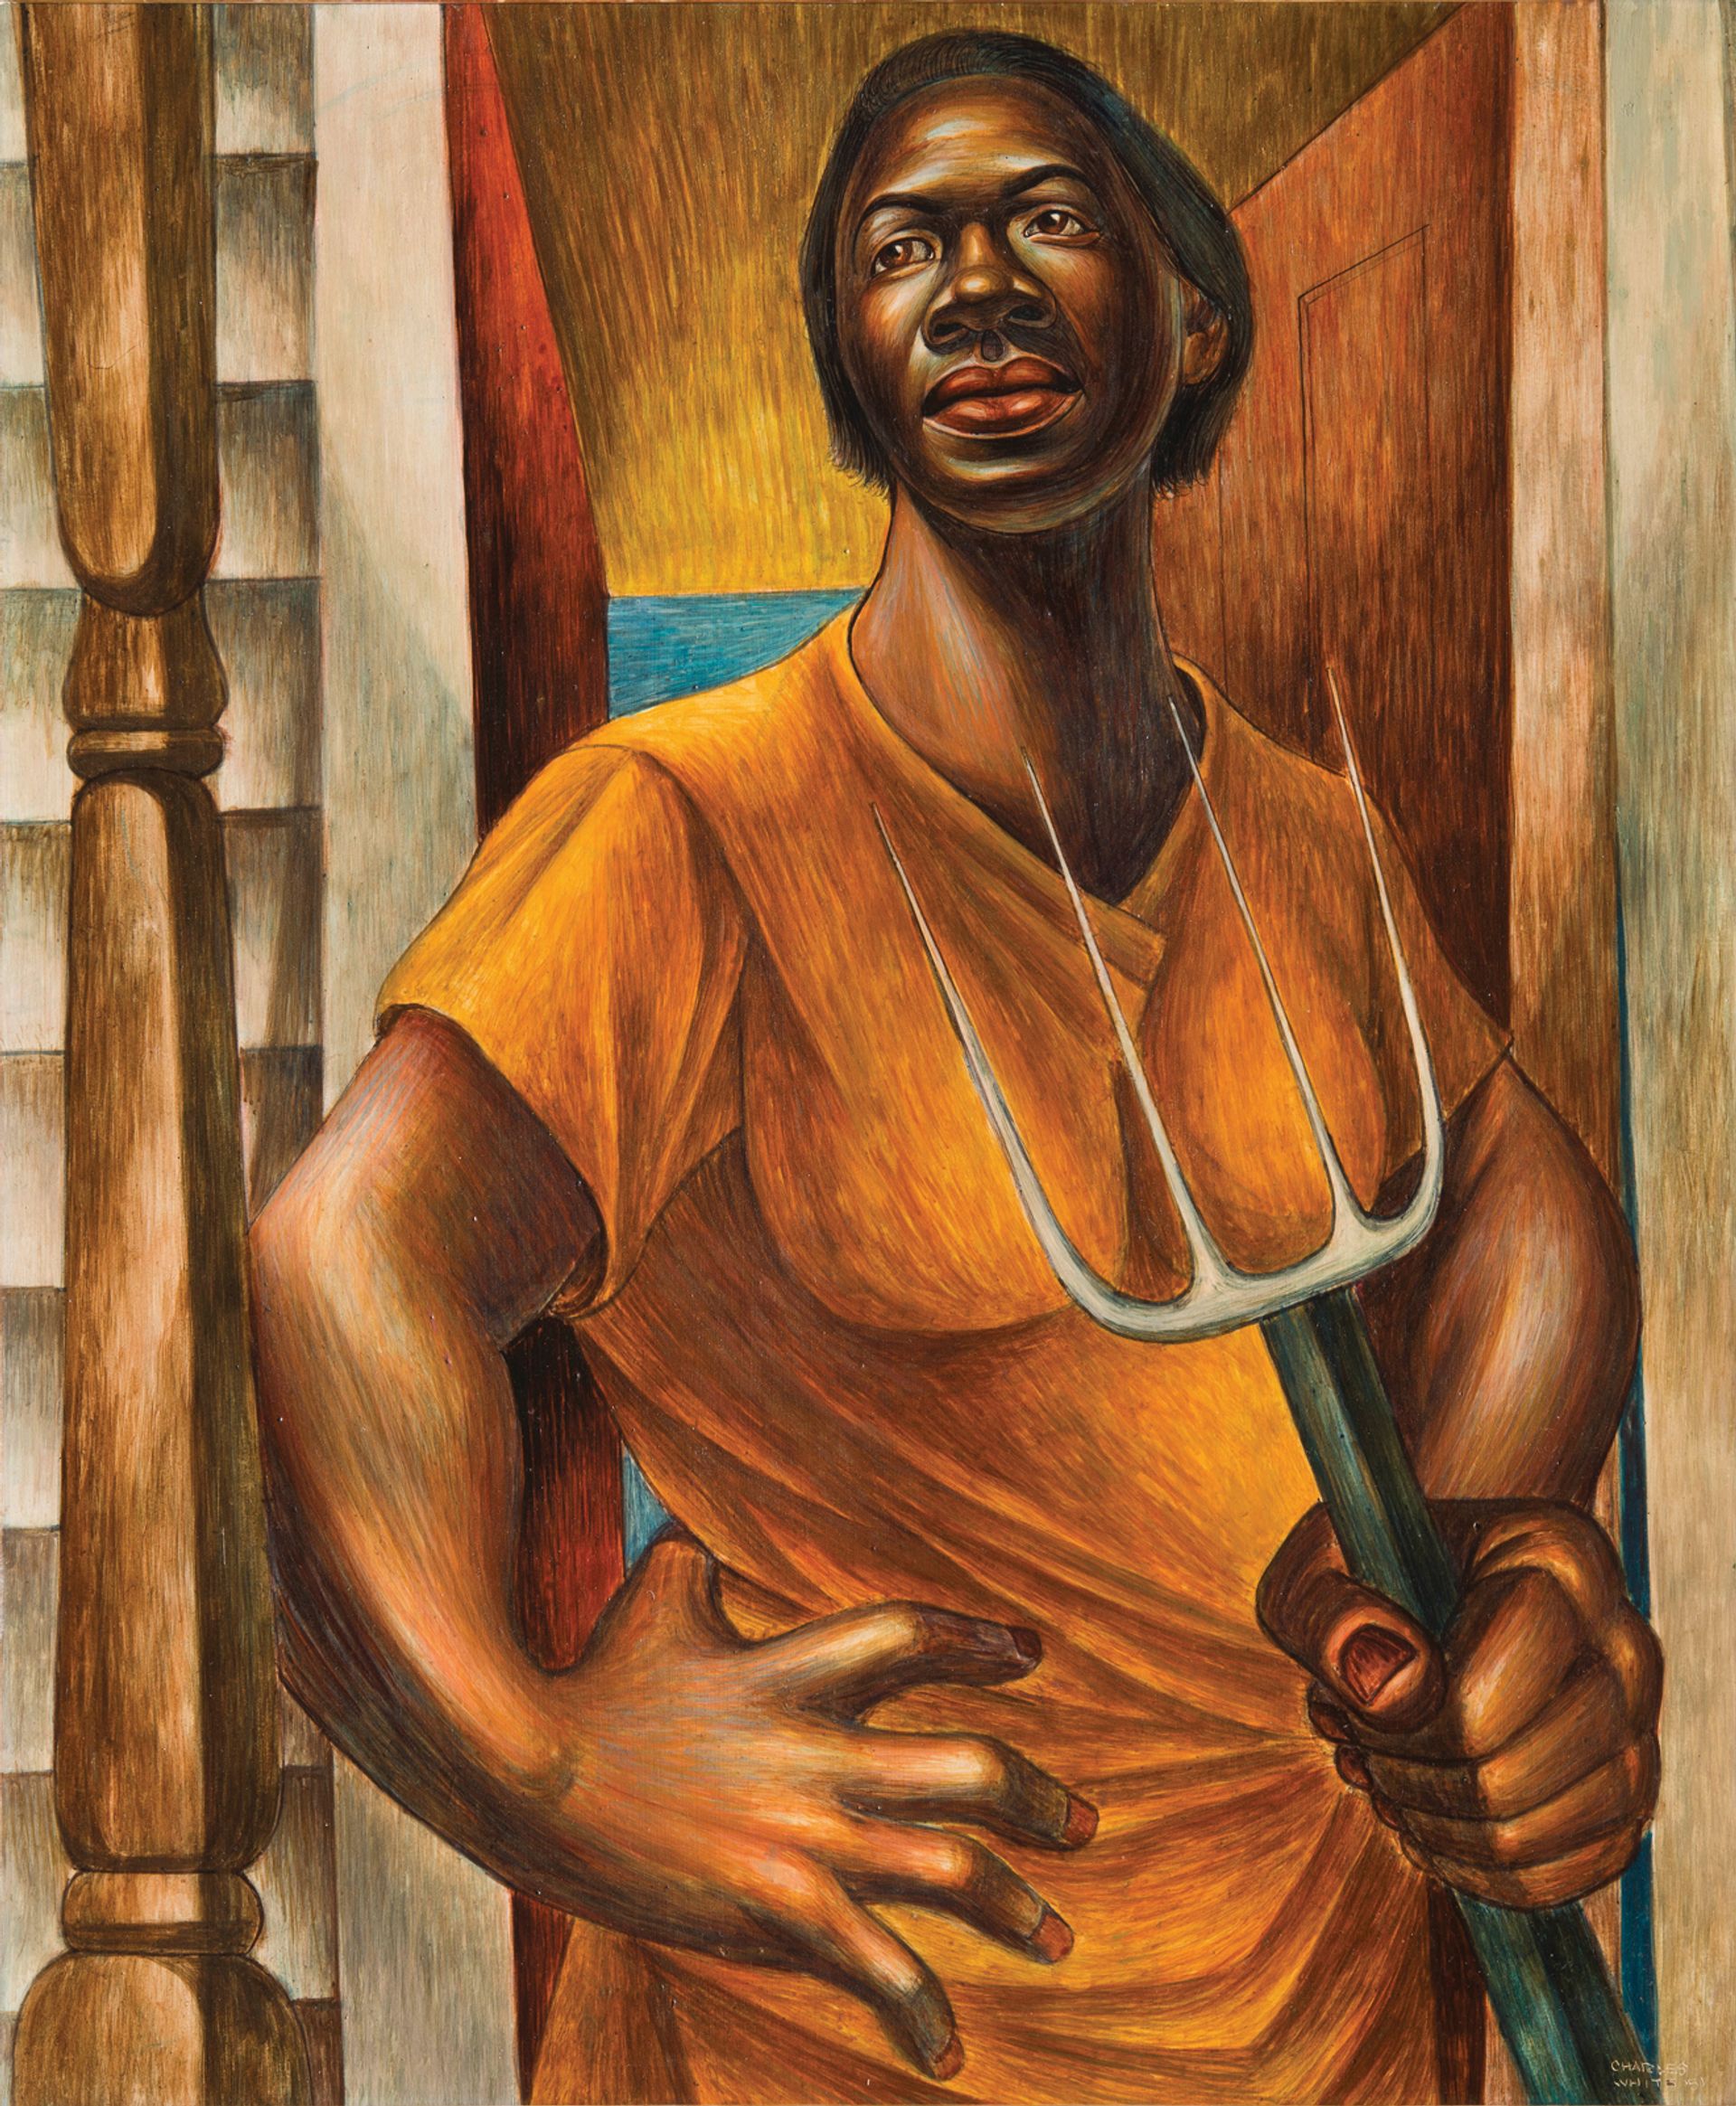 A sharecropper is depicted in Our Land (1951), one of White’s “images of dignity” The Charles White Archives/Gavin Ashworth